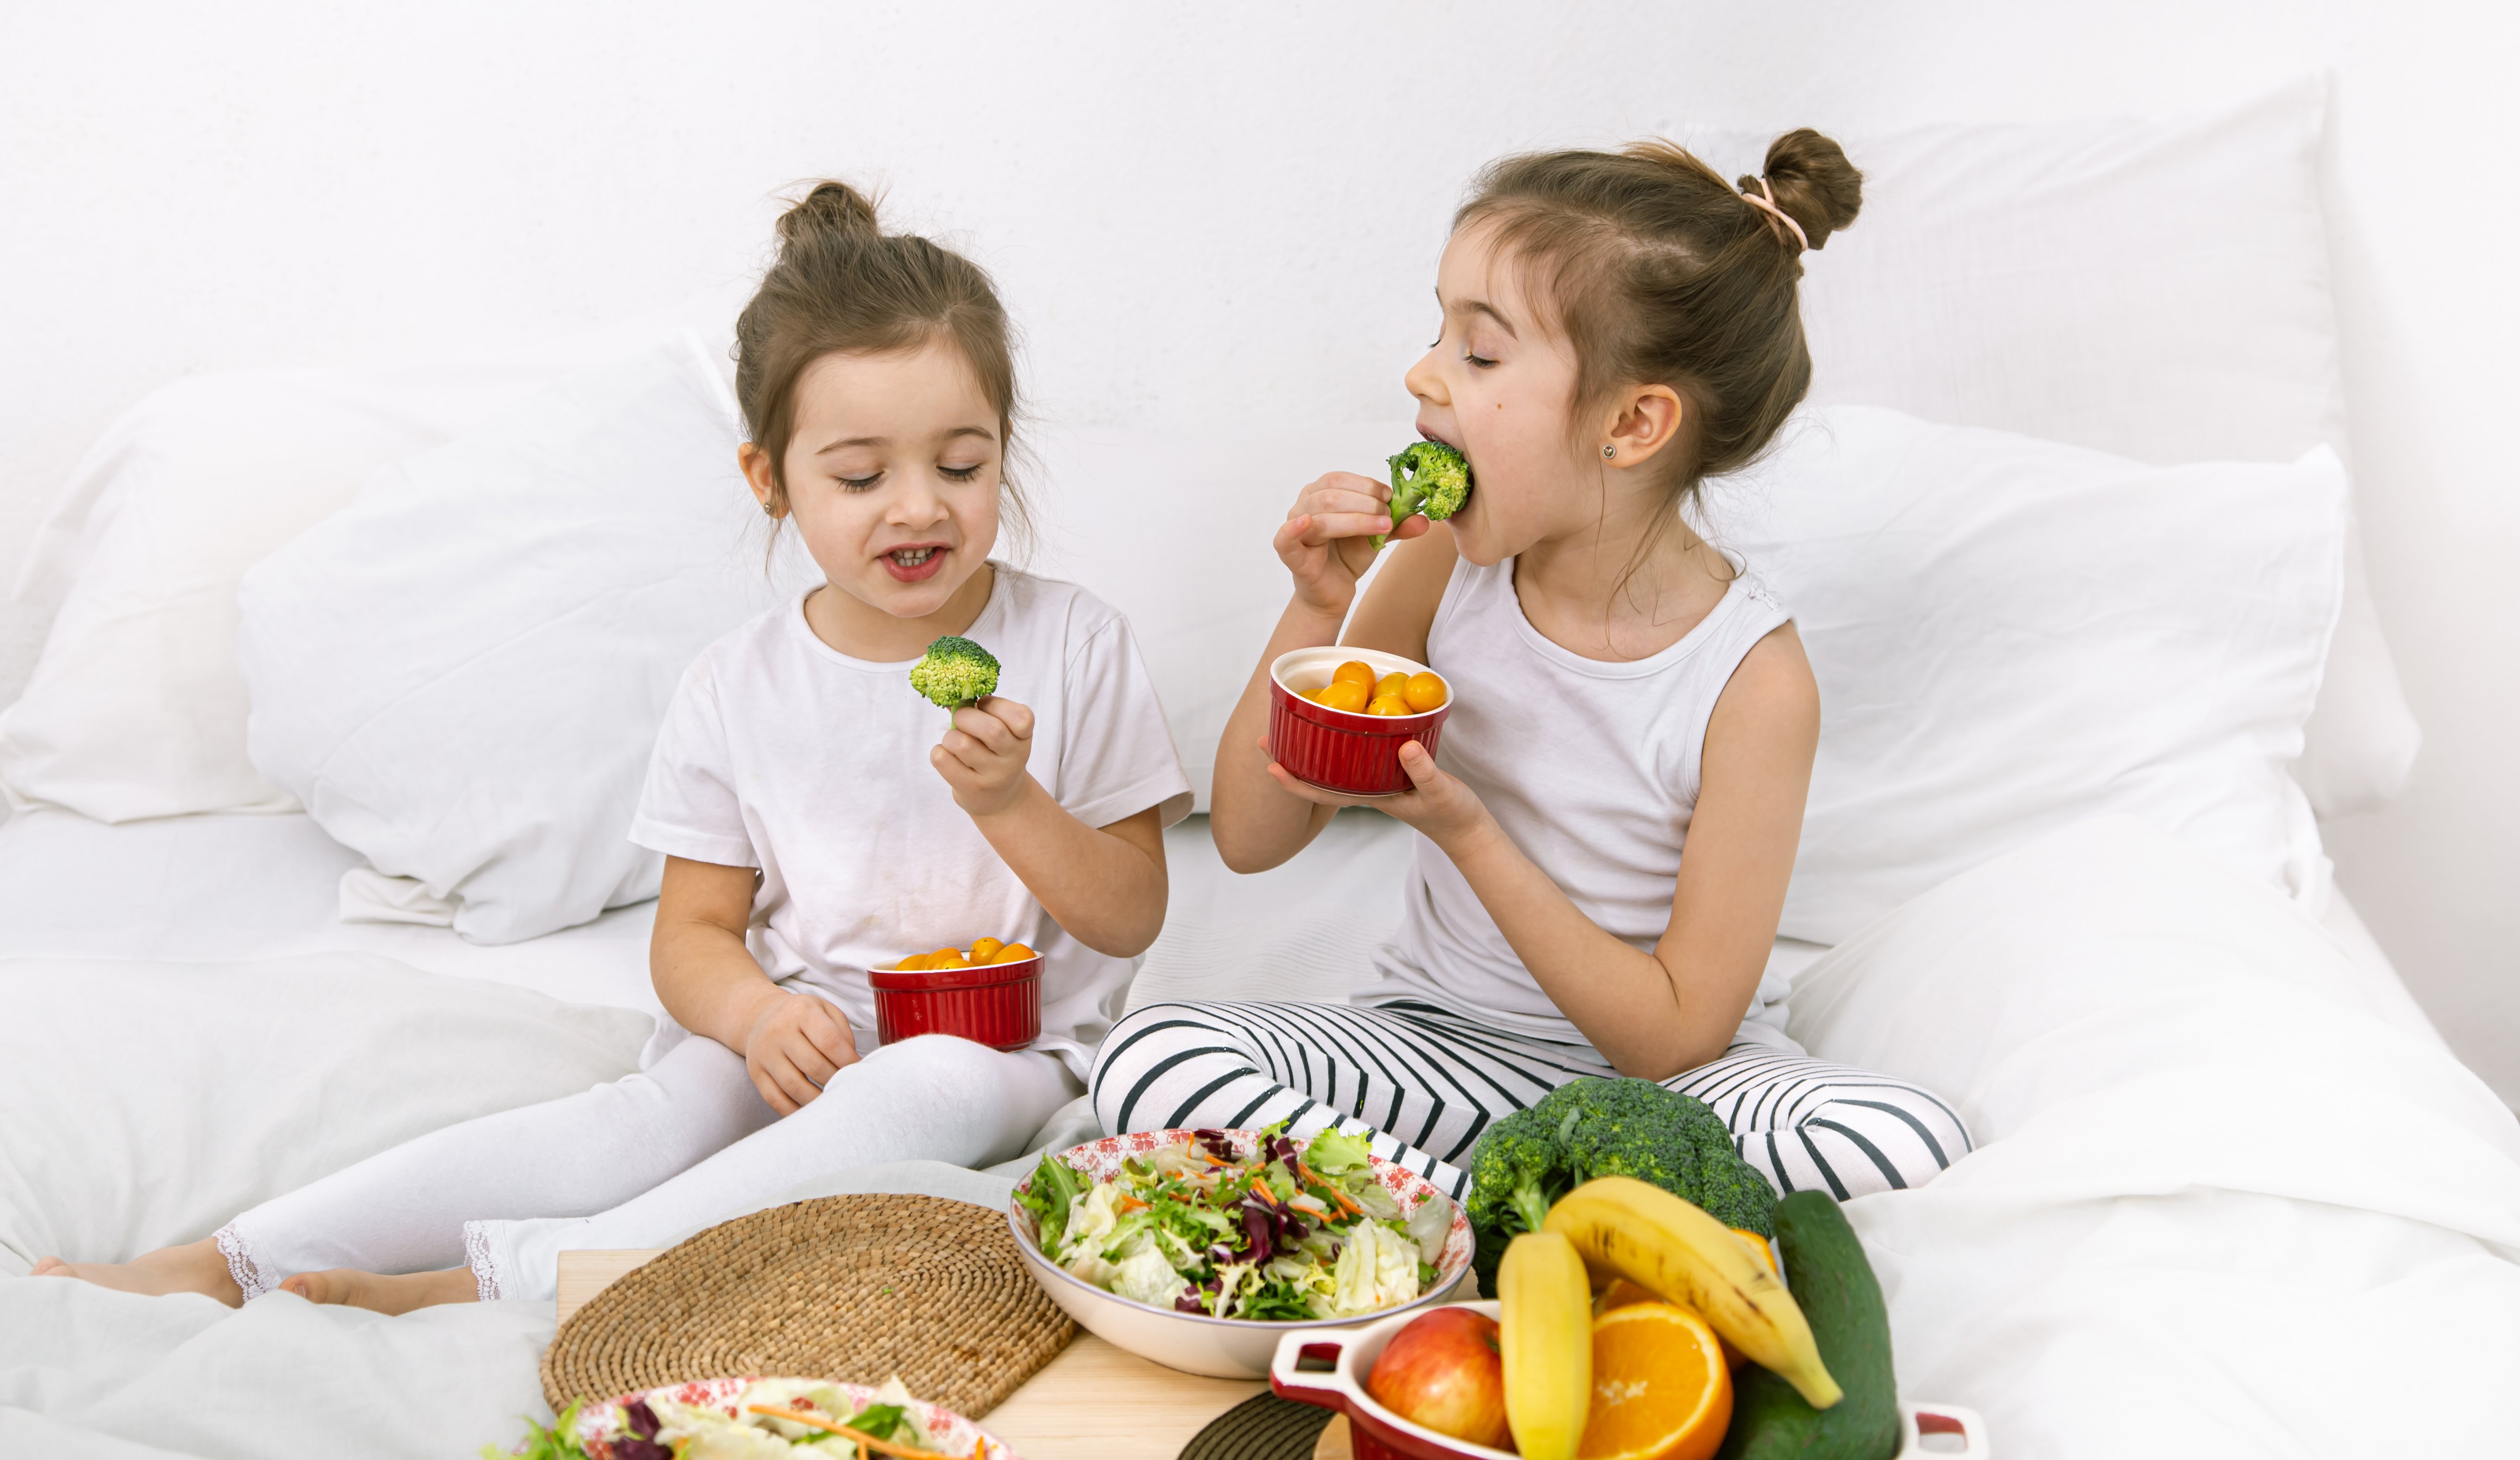 healthy-food-children-eat-fruits-and-vegetables-2021-09-02-07-59-56-utc